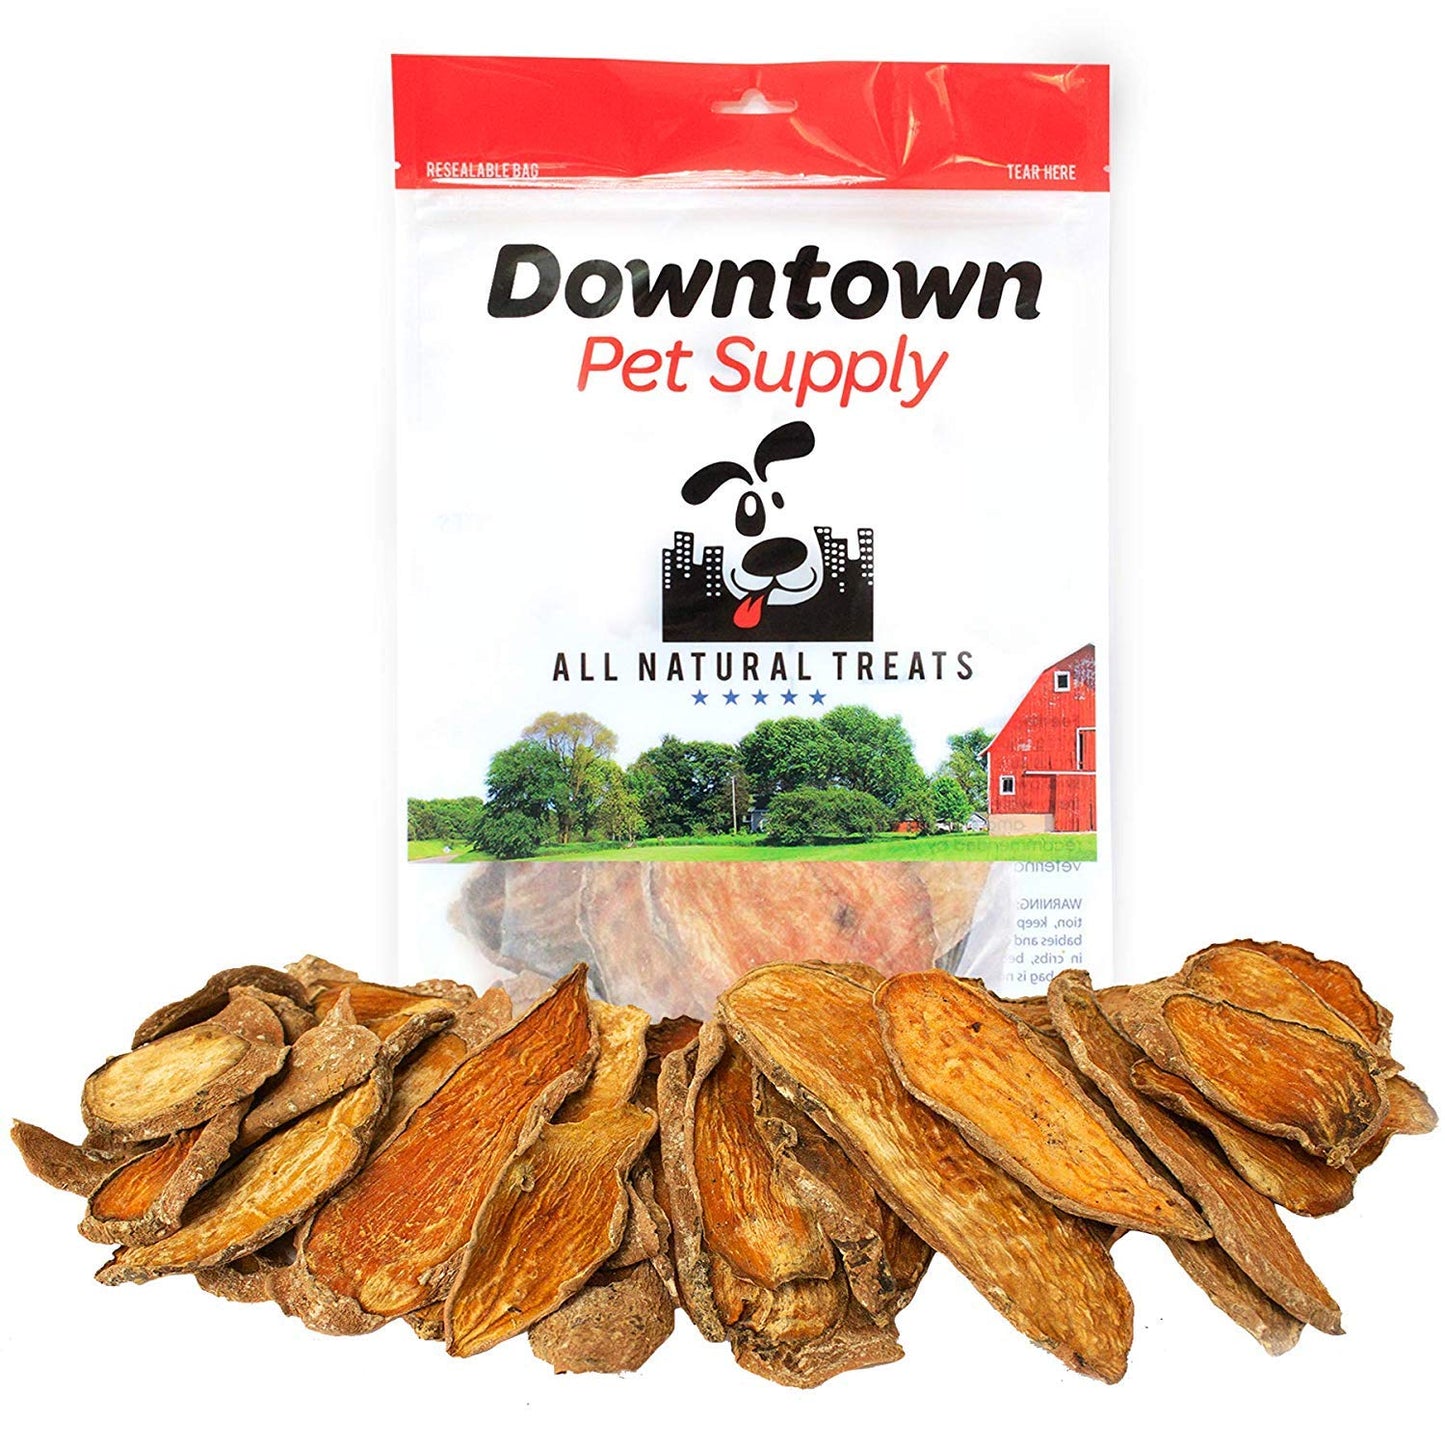 Dehydrated Sweet Potato Dog Treats - Made in USA, Single Ingredient, All Natural